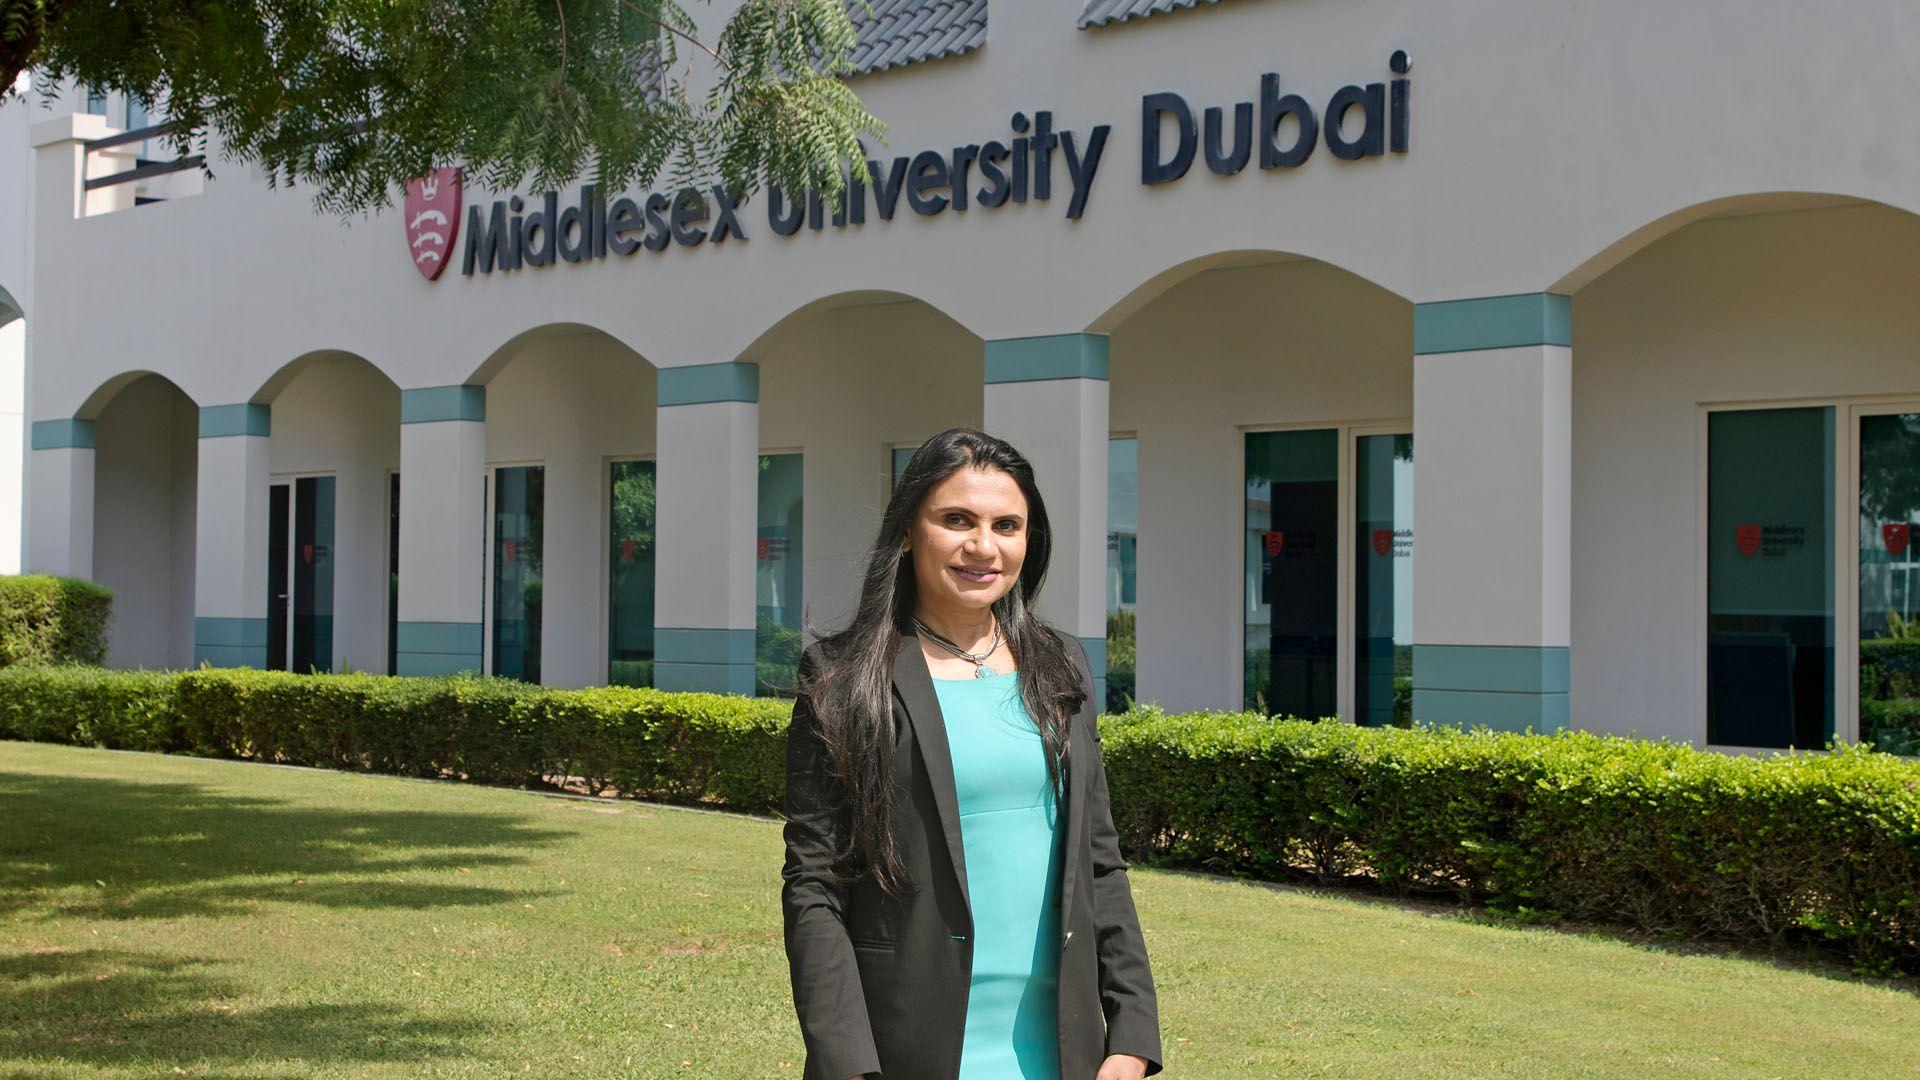 Middlesex University Dubai Explores the Challenges, Evolving Trends and New Technologies That Are Driving Digital Privacy